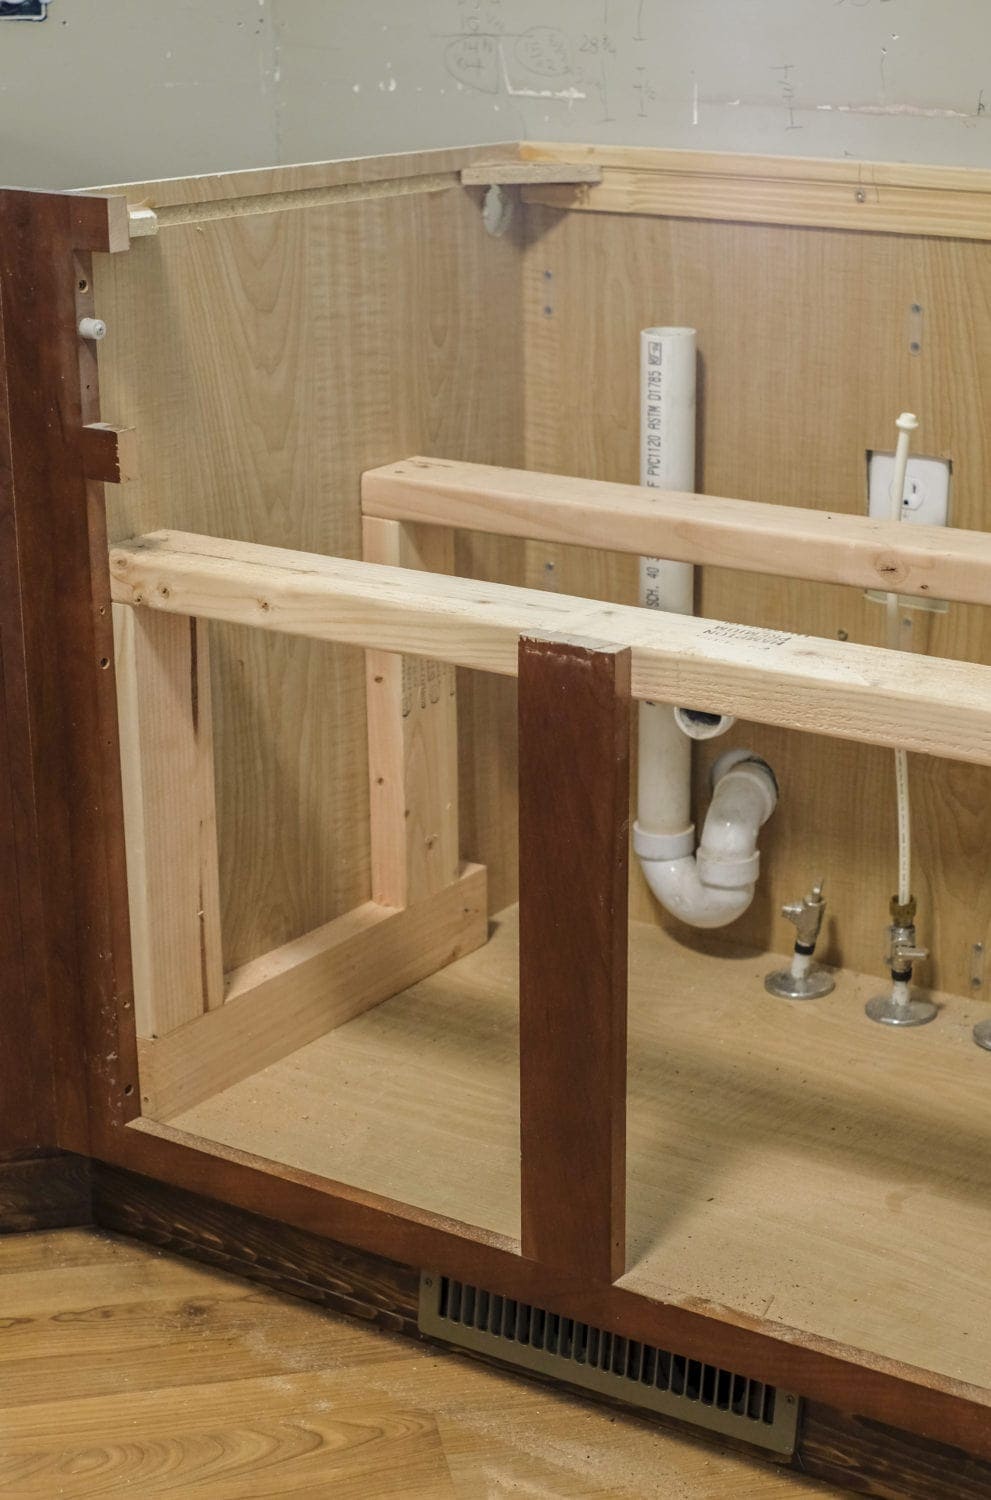 Diy Farmhouse Sink Installation Easy, How To Build A Cabinet For A Farmhouse Sink